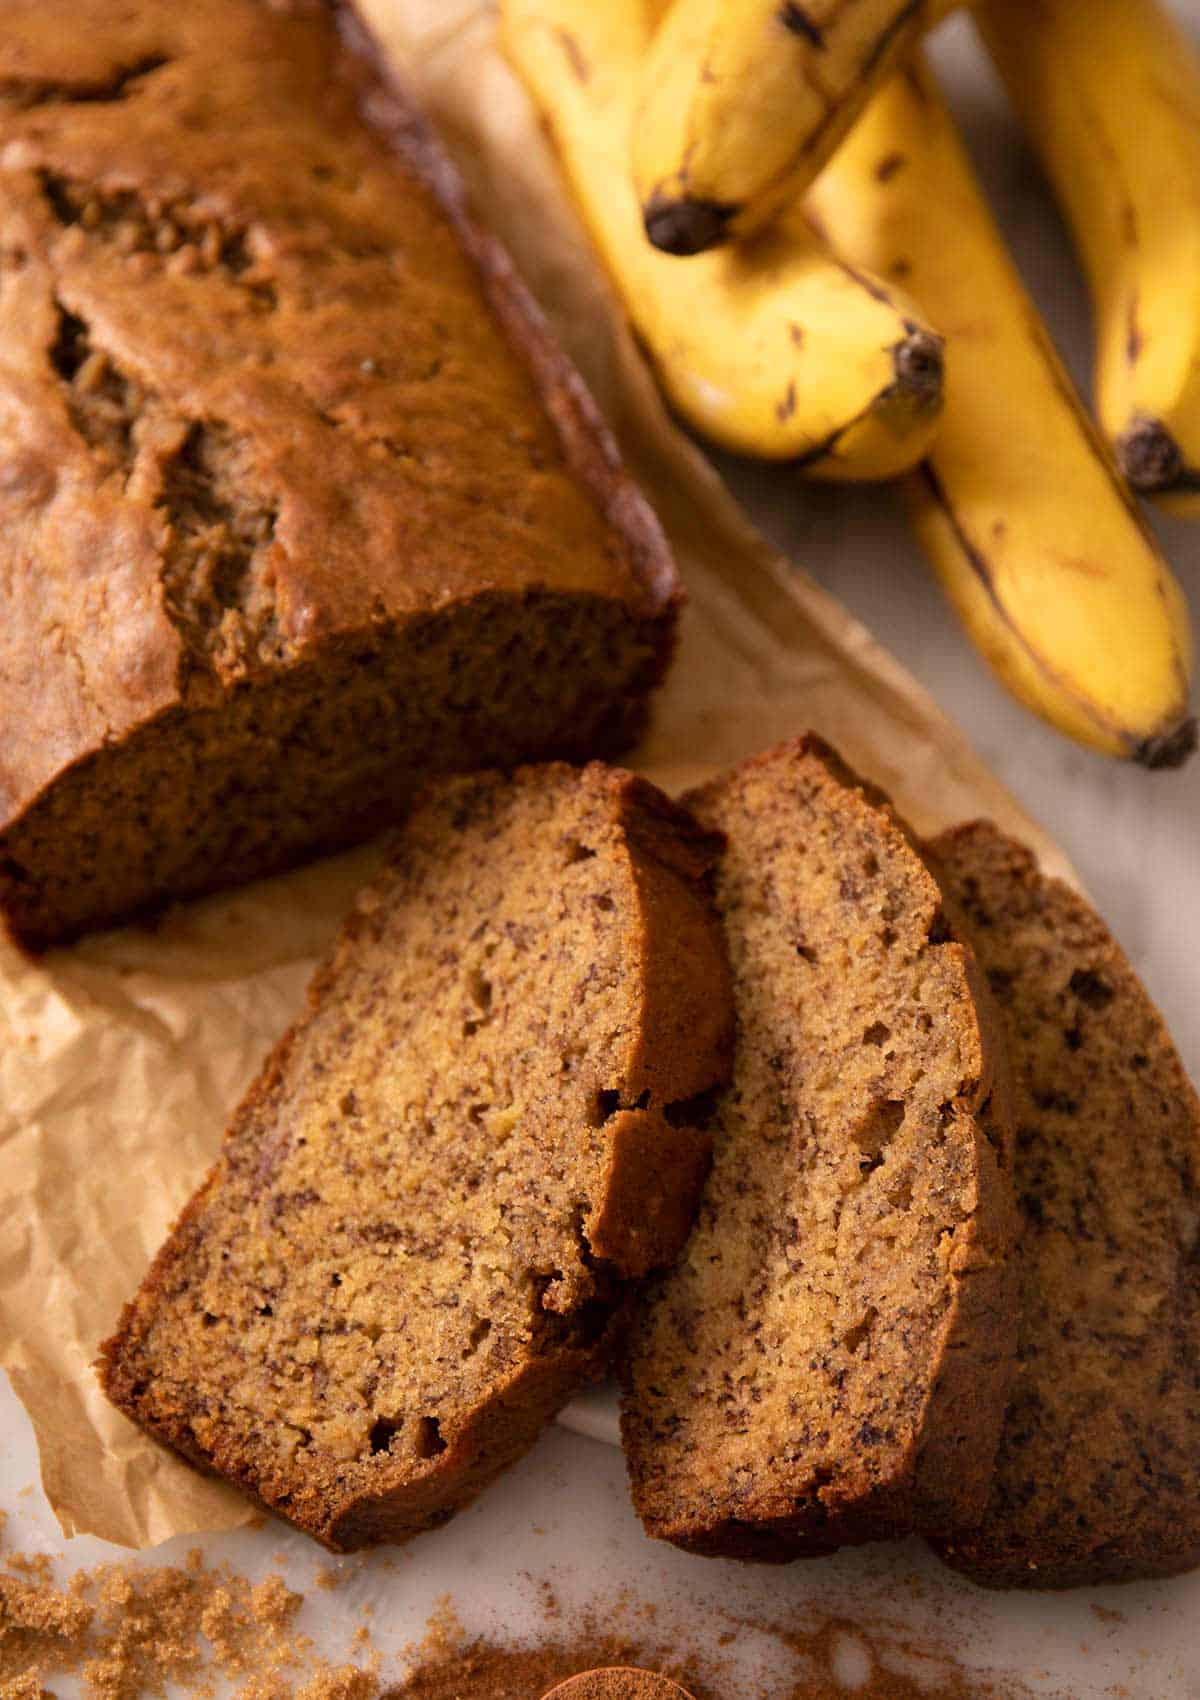 A close up of a loaf of banana bread with some slices cut